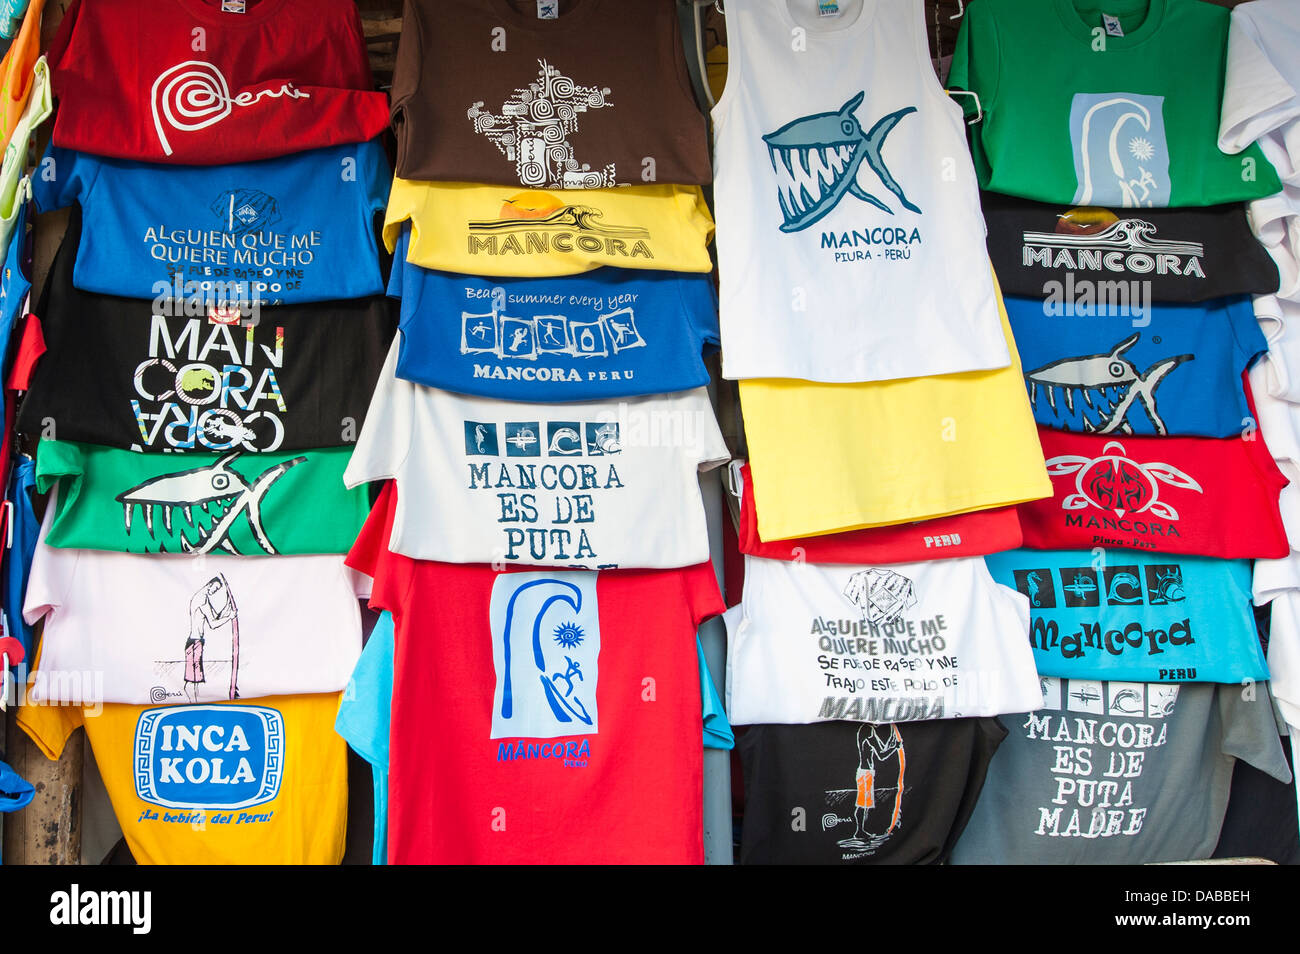 Souvenirs t shirts shirt clothes clothing in local market in Mancora, Peru. Stock Photo